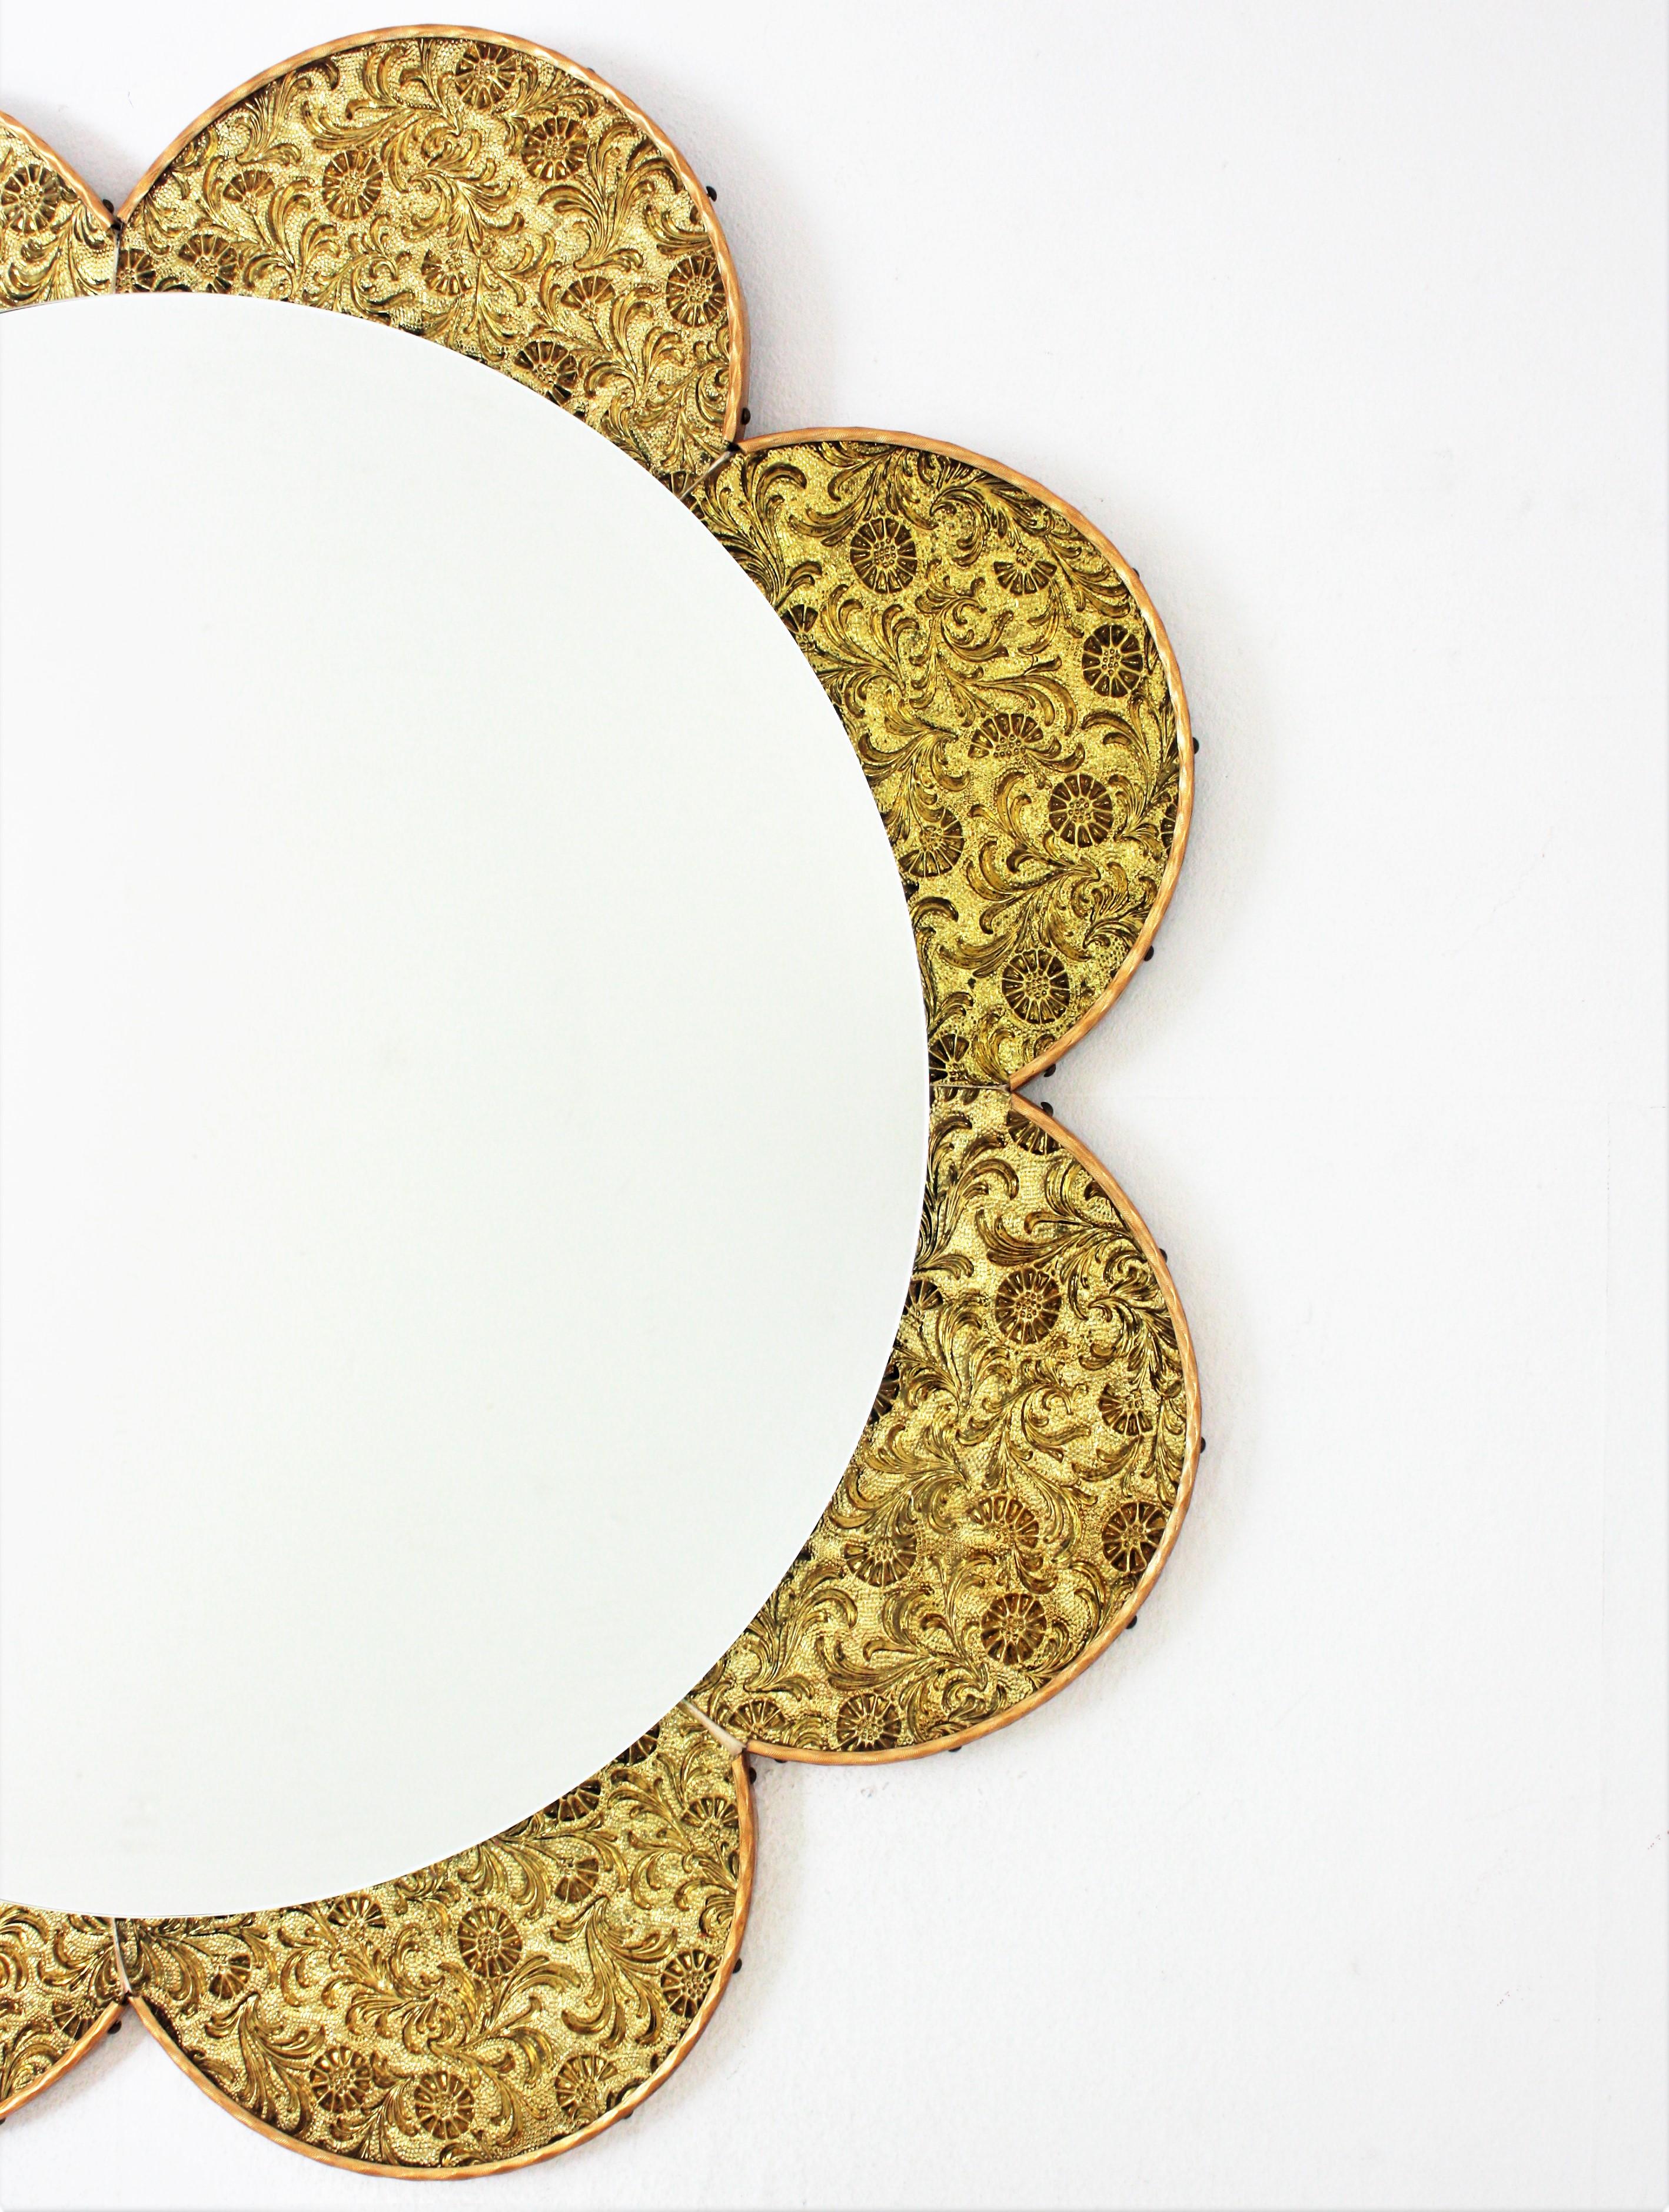 Spanish Flower Shaped Mirror with Golden Glass Petals For Sale